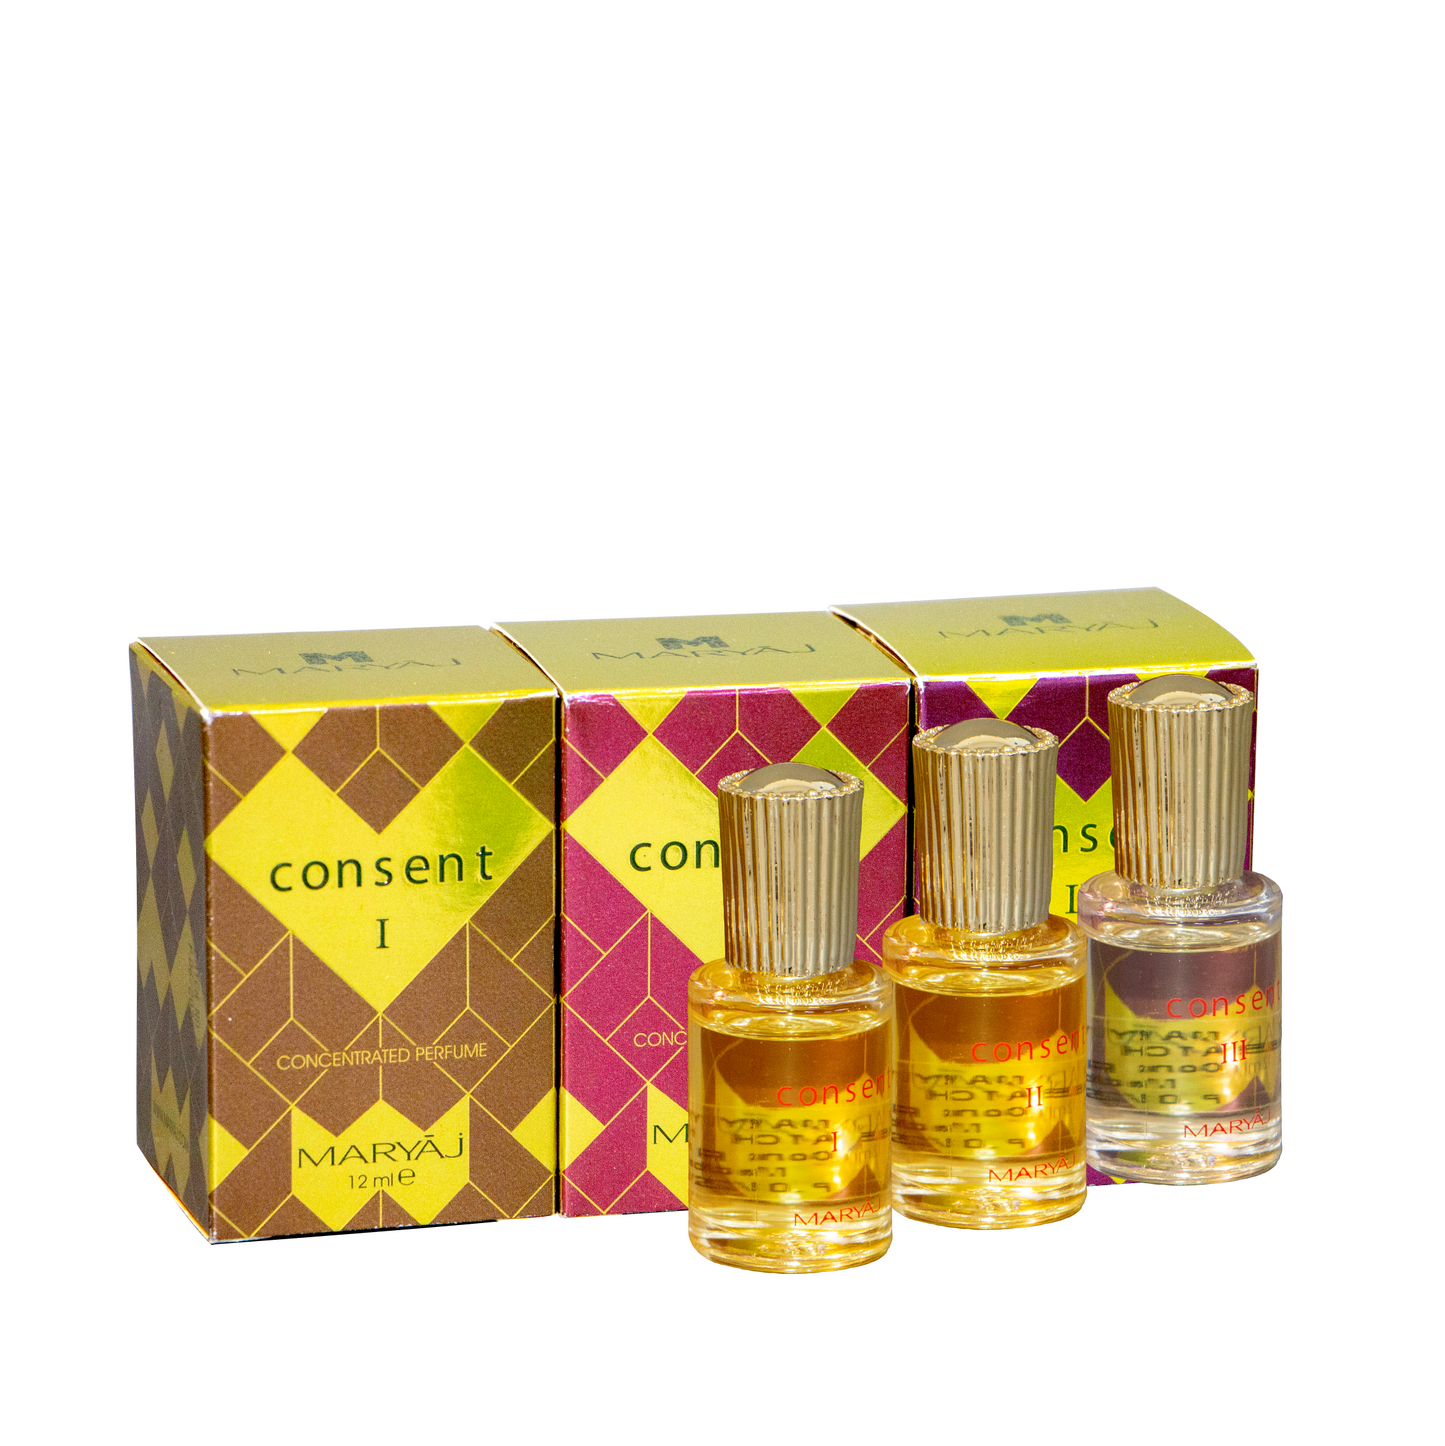 CONSENT Concentrated Perfume Oil, 12 ml (Set of 3)